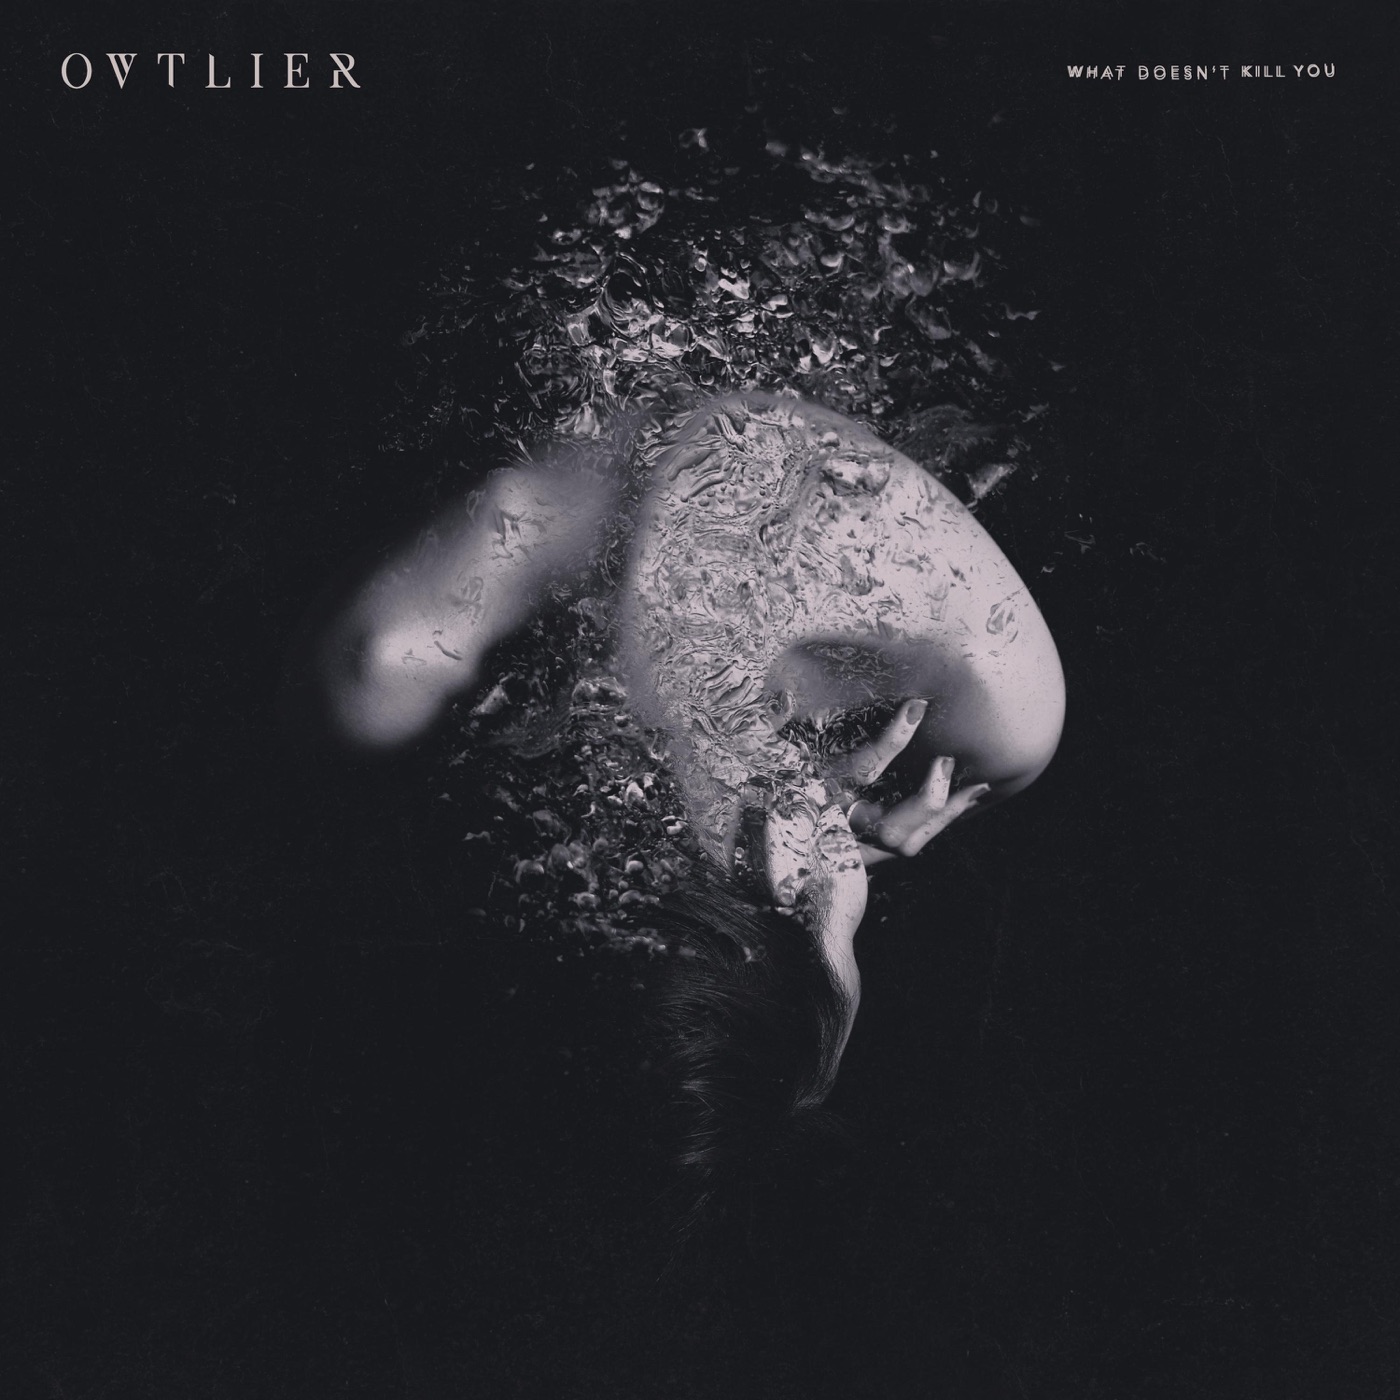 Ovtlier - What Doesn't Kill You [EP] (2017)